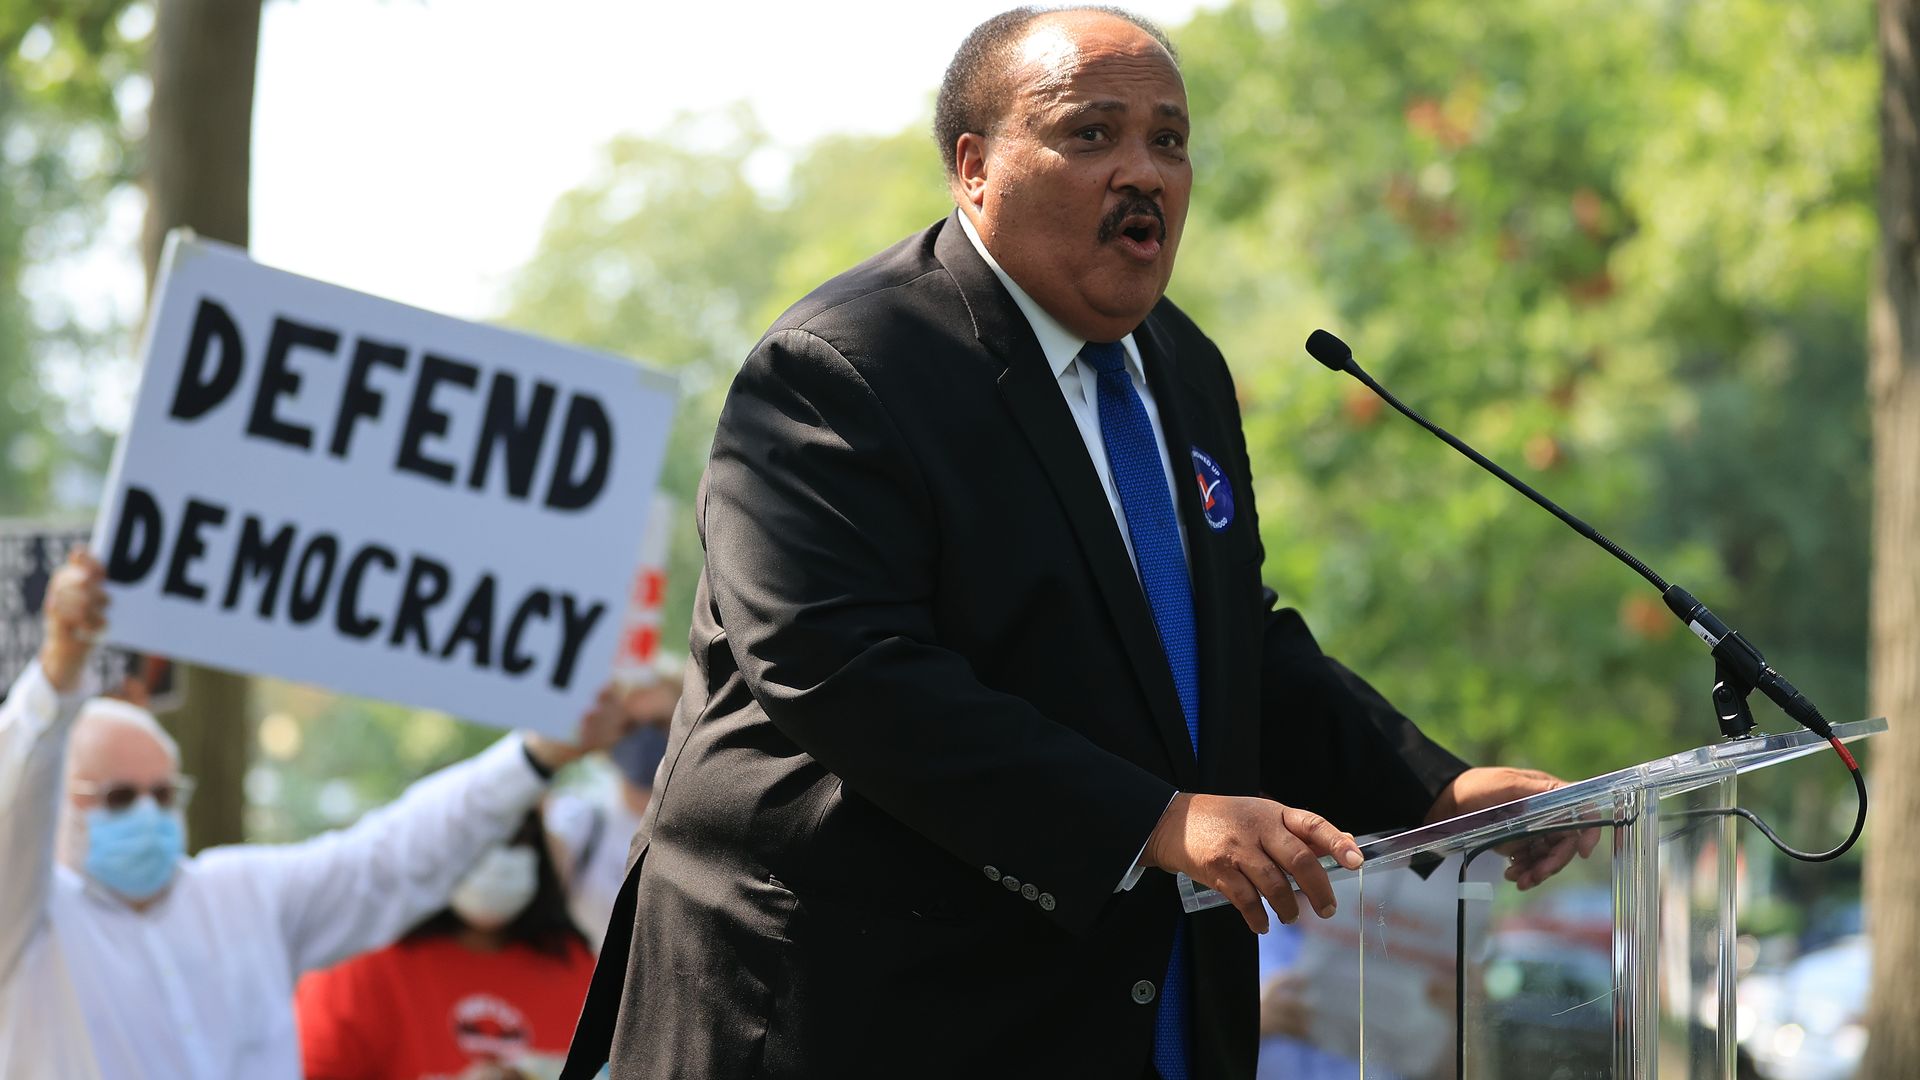 Martin Luther King III addresses a 'Let's Finish the Job for the People' rally near the U.S. Capitol on September 14, 2021 in Washington, DC.